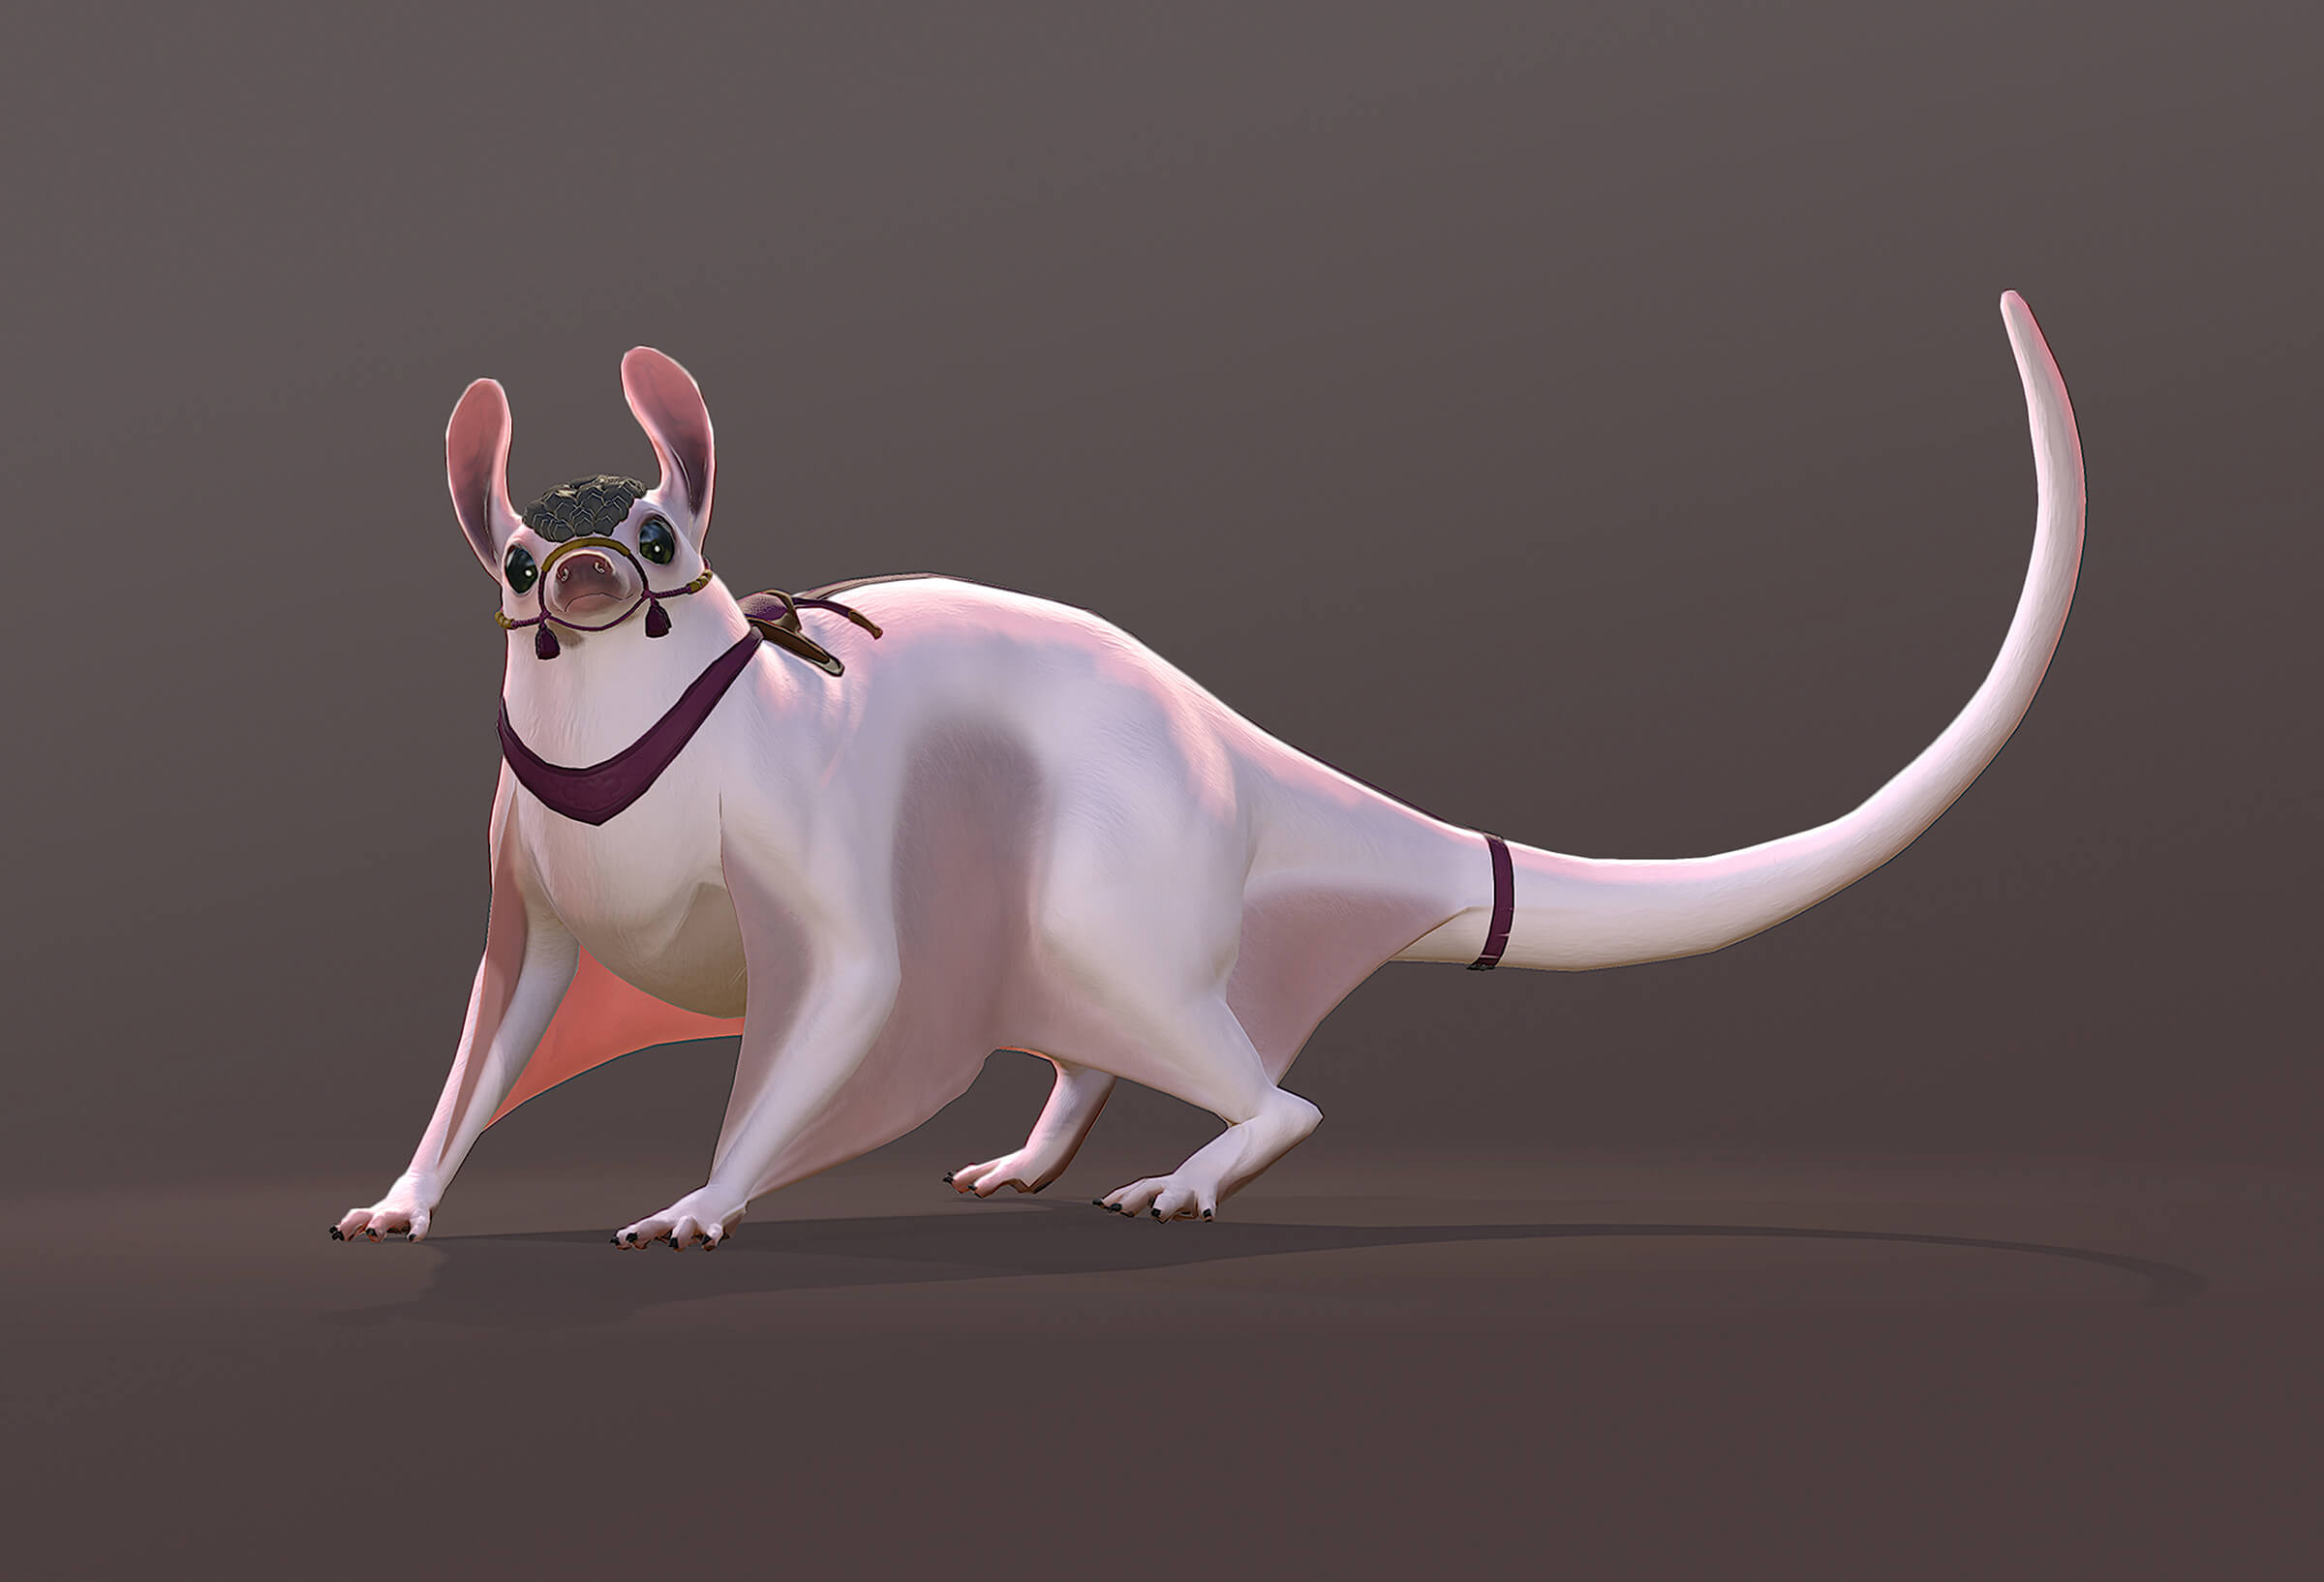 computer-generated 3D model of a character that resembles a rat, with webbed legs